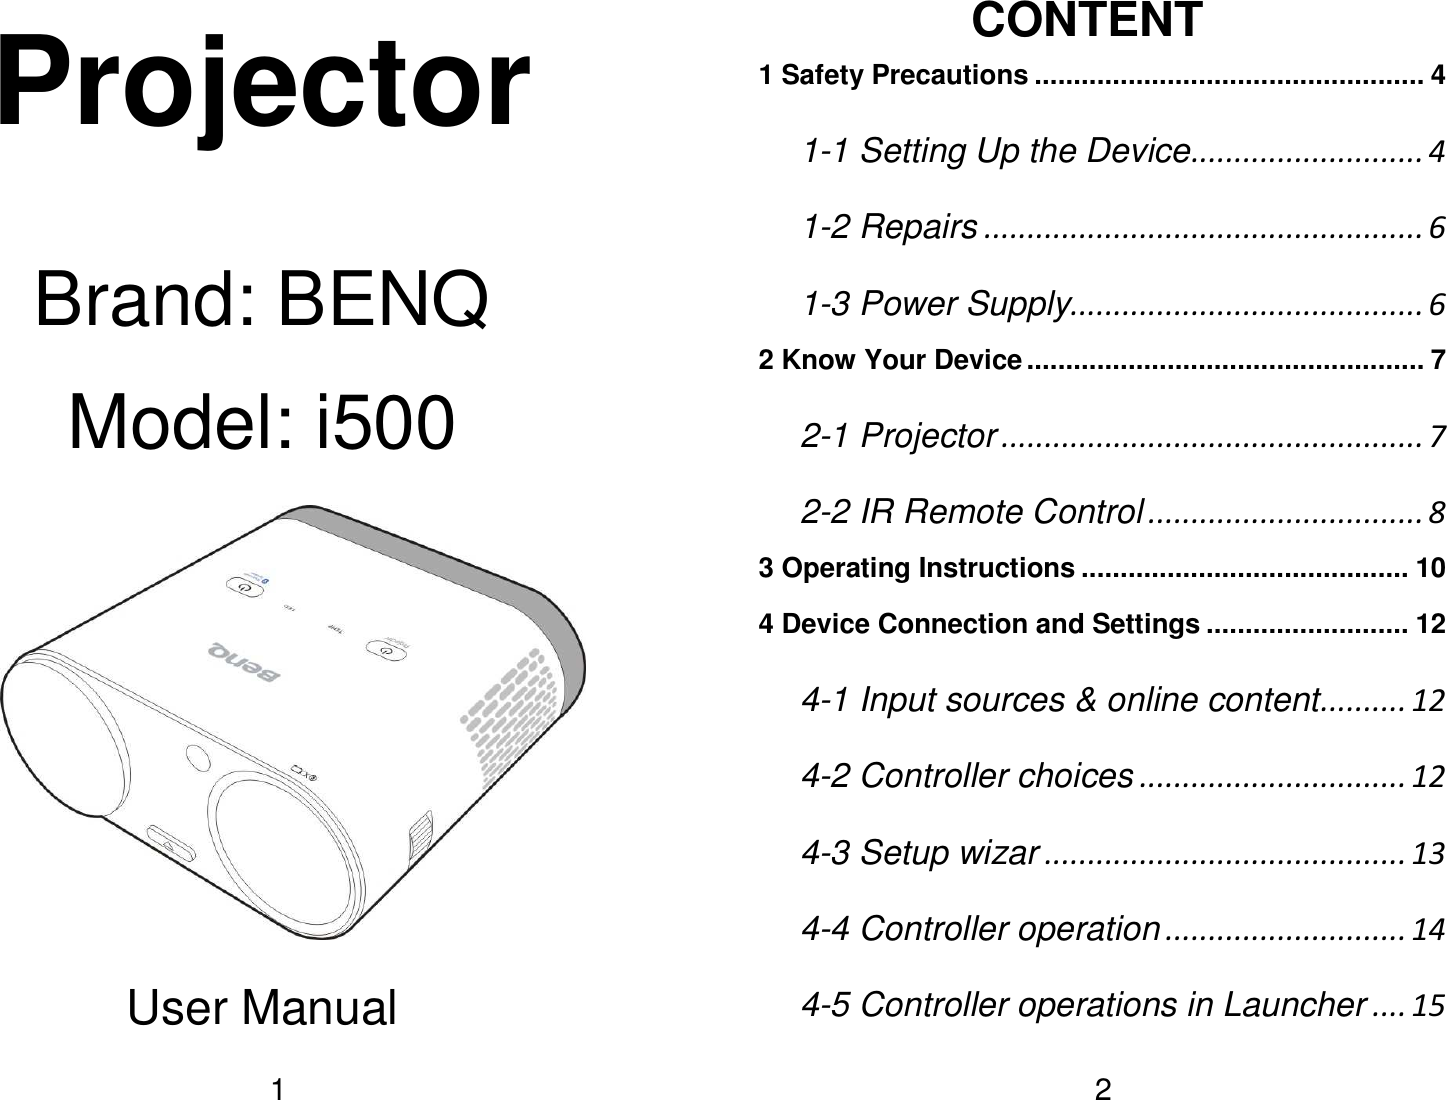   1Projector  Brand: BENQ Model: i500     User Manual   2CONTENT 1 Safety Precautions .................................................. 4 1-1 Setting Up the Device ........................... 4 1-2 Repairs ................................................... 6 1-3 Power Supply ......................................... 6 2 Know Your Device ................................................... 7 2-1 Projector ................................................. 7 2-2 IR Remote Control ................................ 8 3 Operating Instructions .......................................... 10 4 Device Connection and Settings .......................... 12 4-1 Input sources &amp; online content .......... 12 4-2 Controller choices ............................... 12 4-3 Setup wizar .......................................... 13 4-4 Controller operation ............................ 14 4-5 Controller operations in Launcher .... 15 